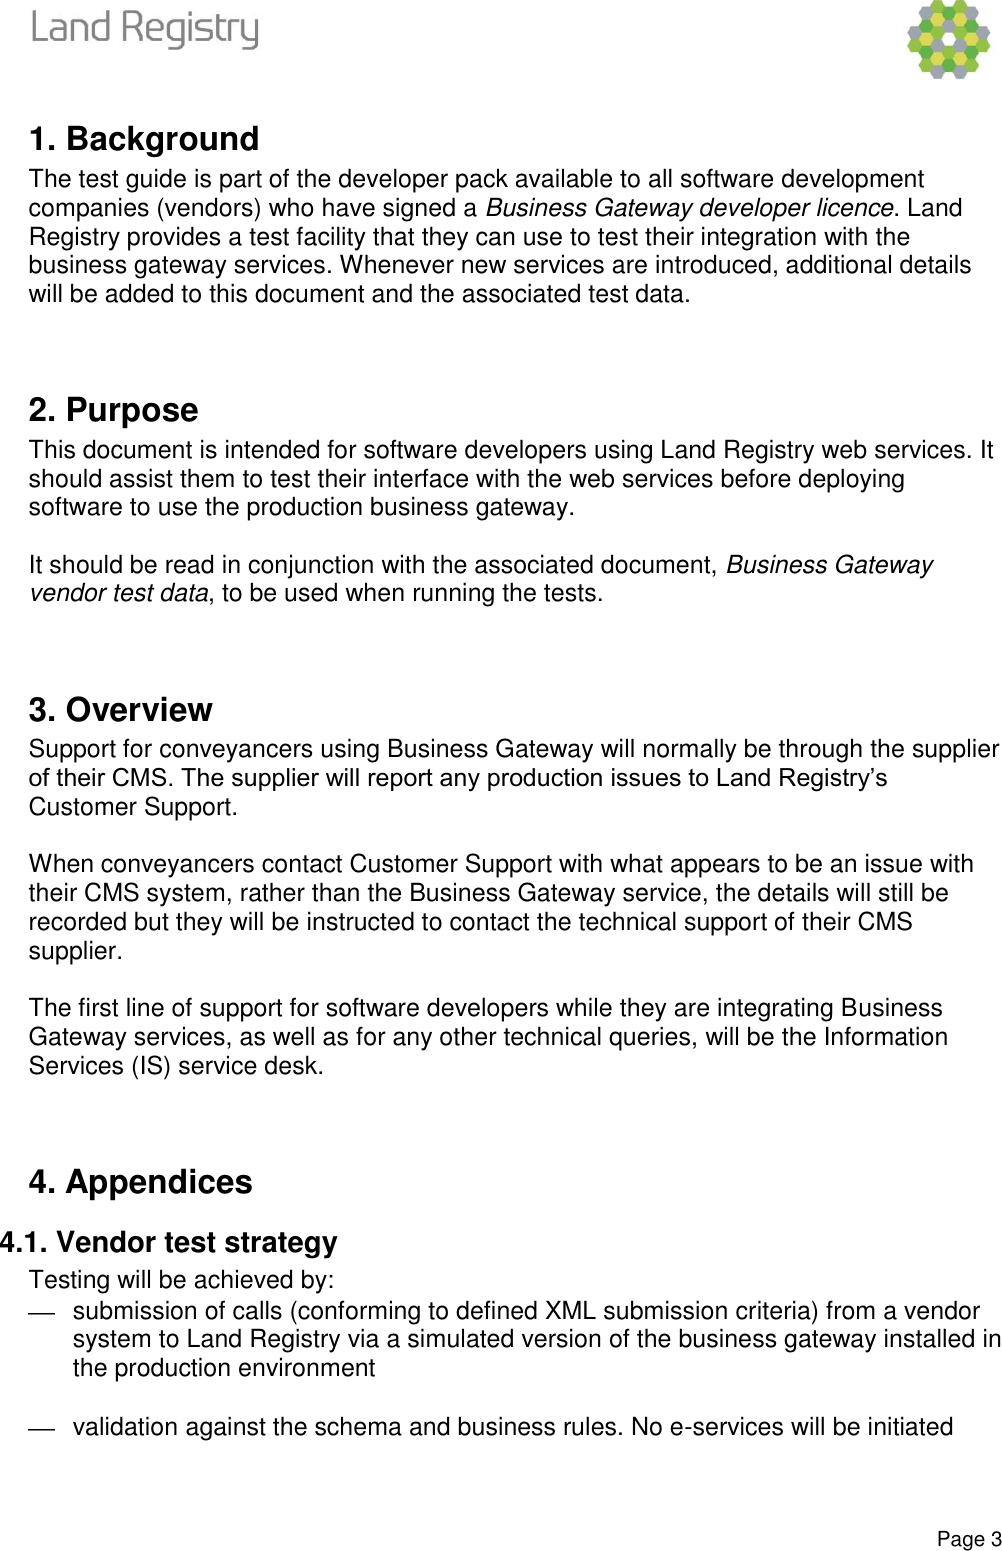 Page 3 of 8 - Business-gateway-vendor--guide